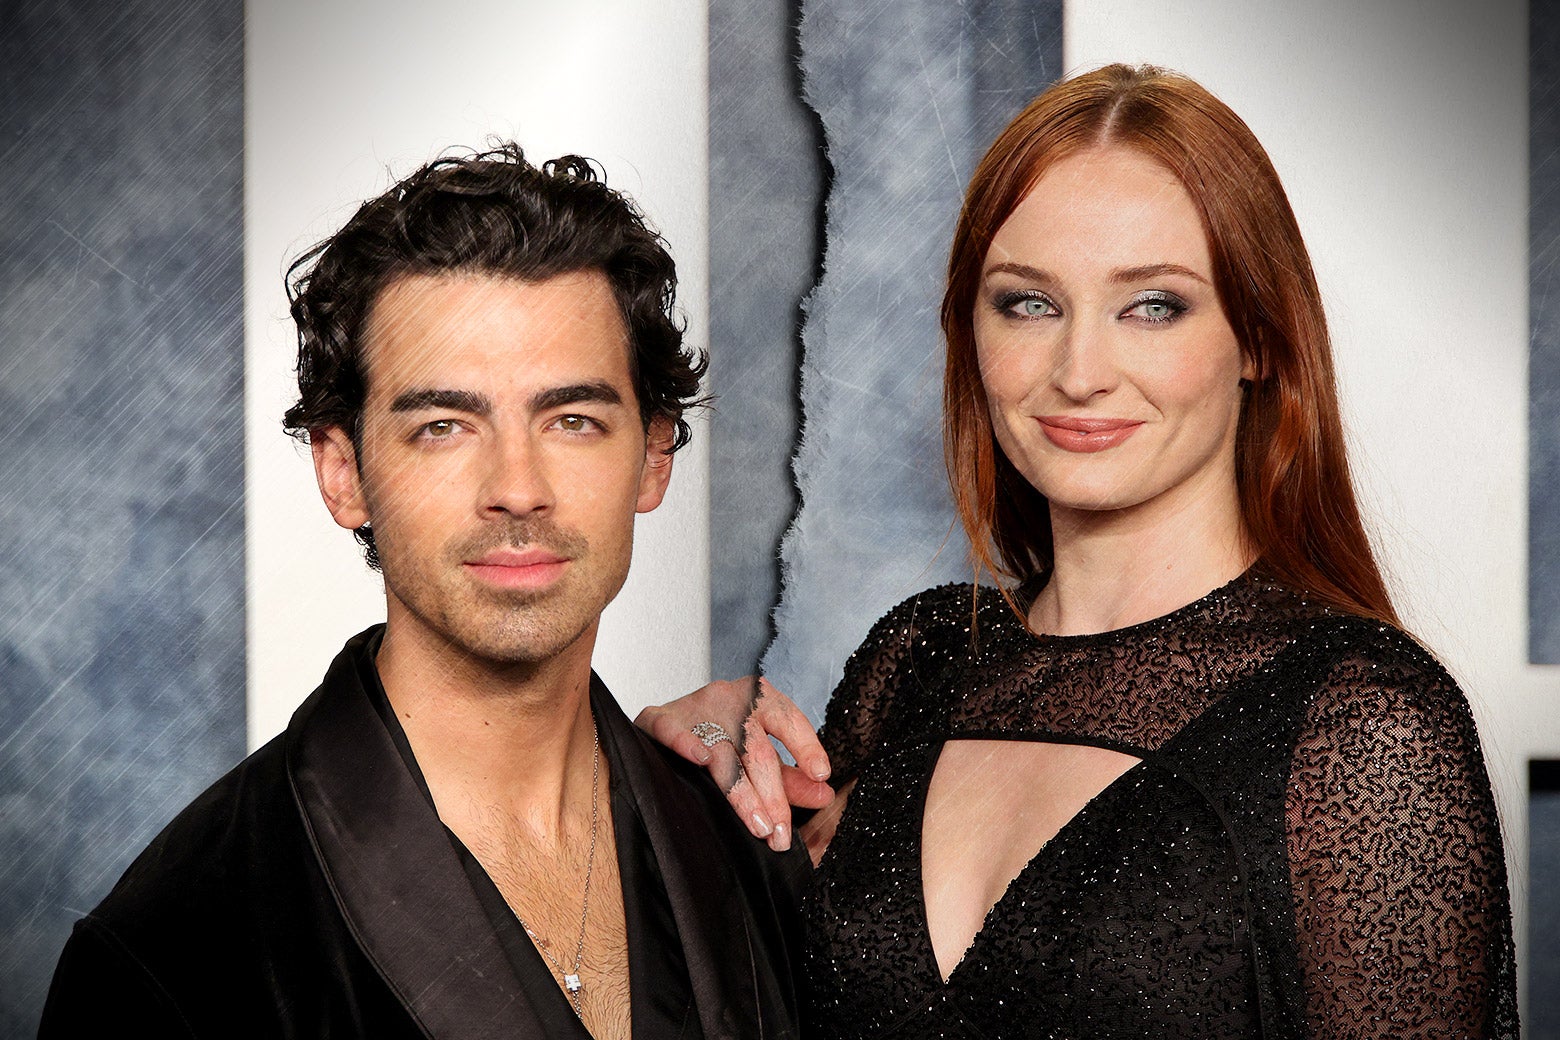 Joe Jonas and Sophie Turner, with a split down the middle between them.